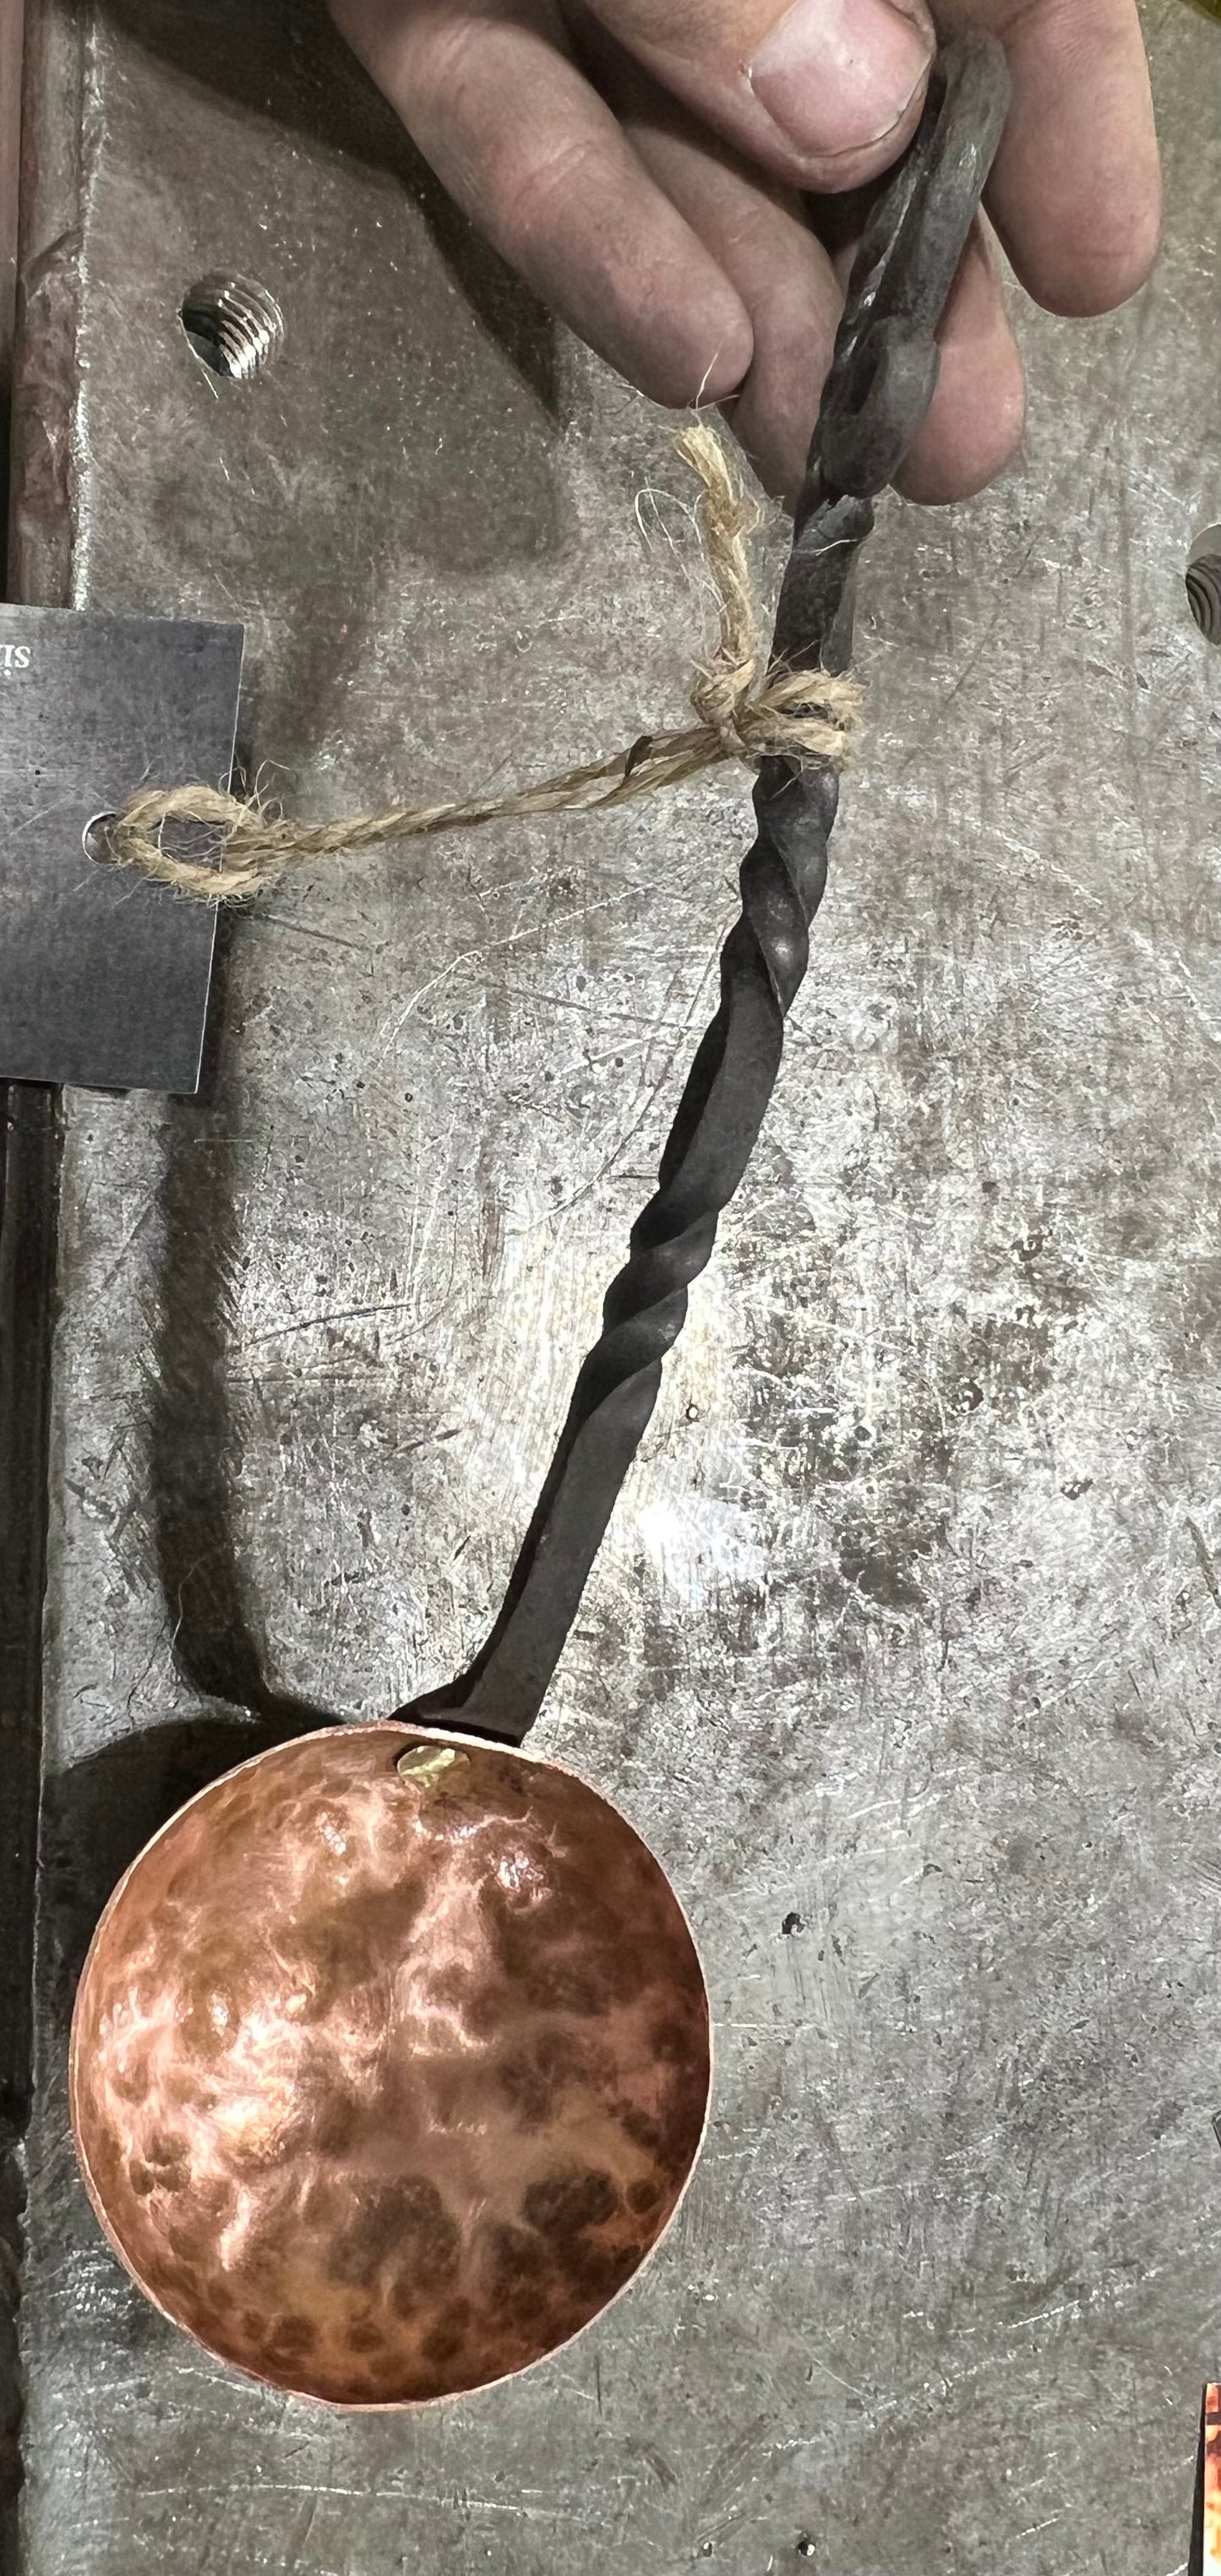 Homemade copper spoon with brass rivet and mild steel handle